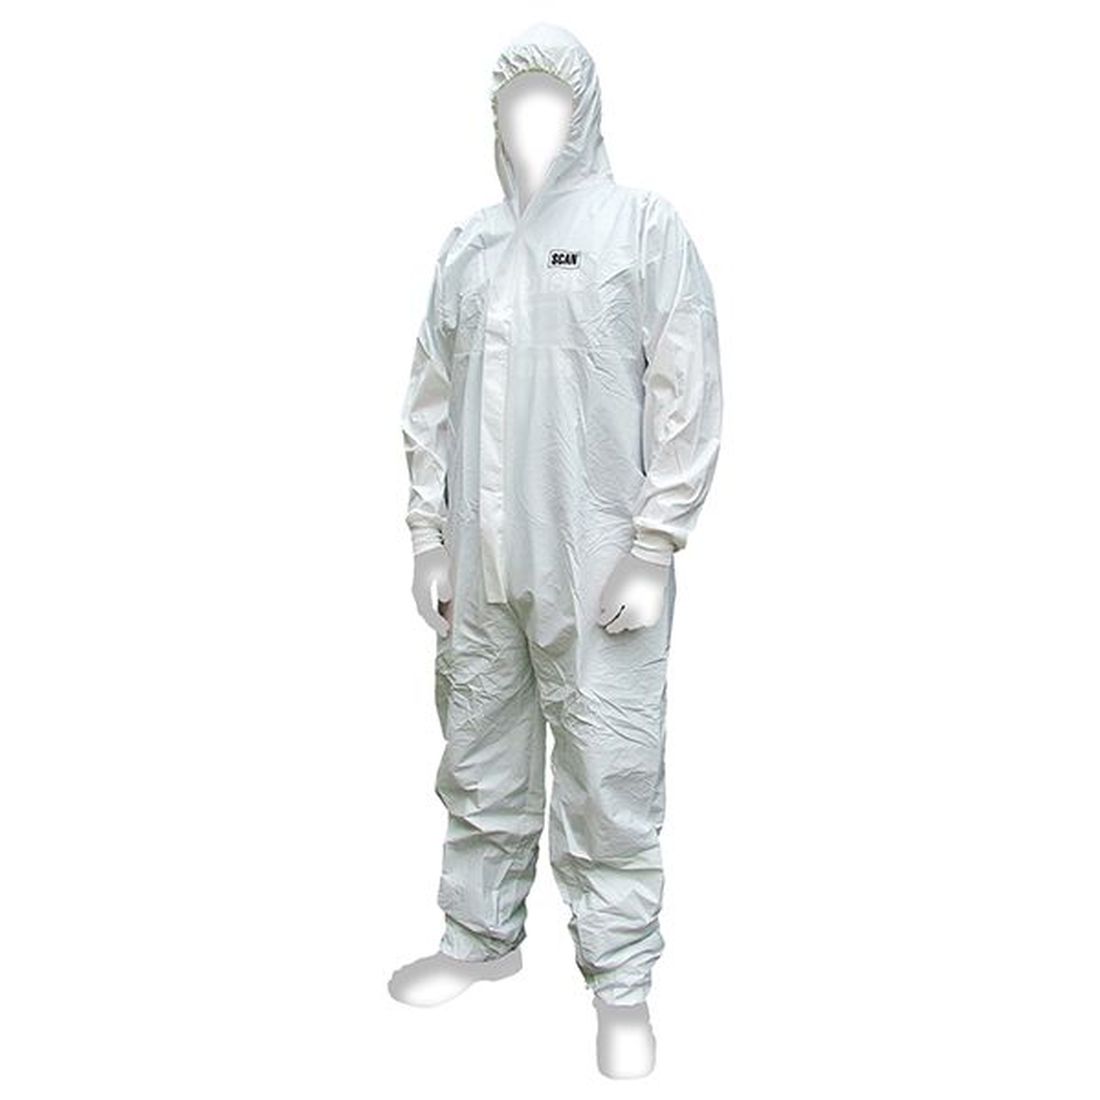 Scan Chemical Splash Resistant Disposable Coverall White Type 5/6 XXL (45-49in)      